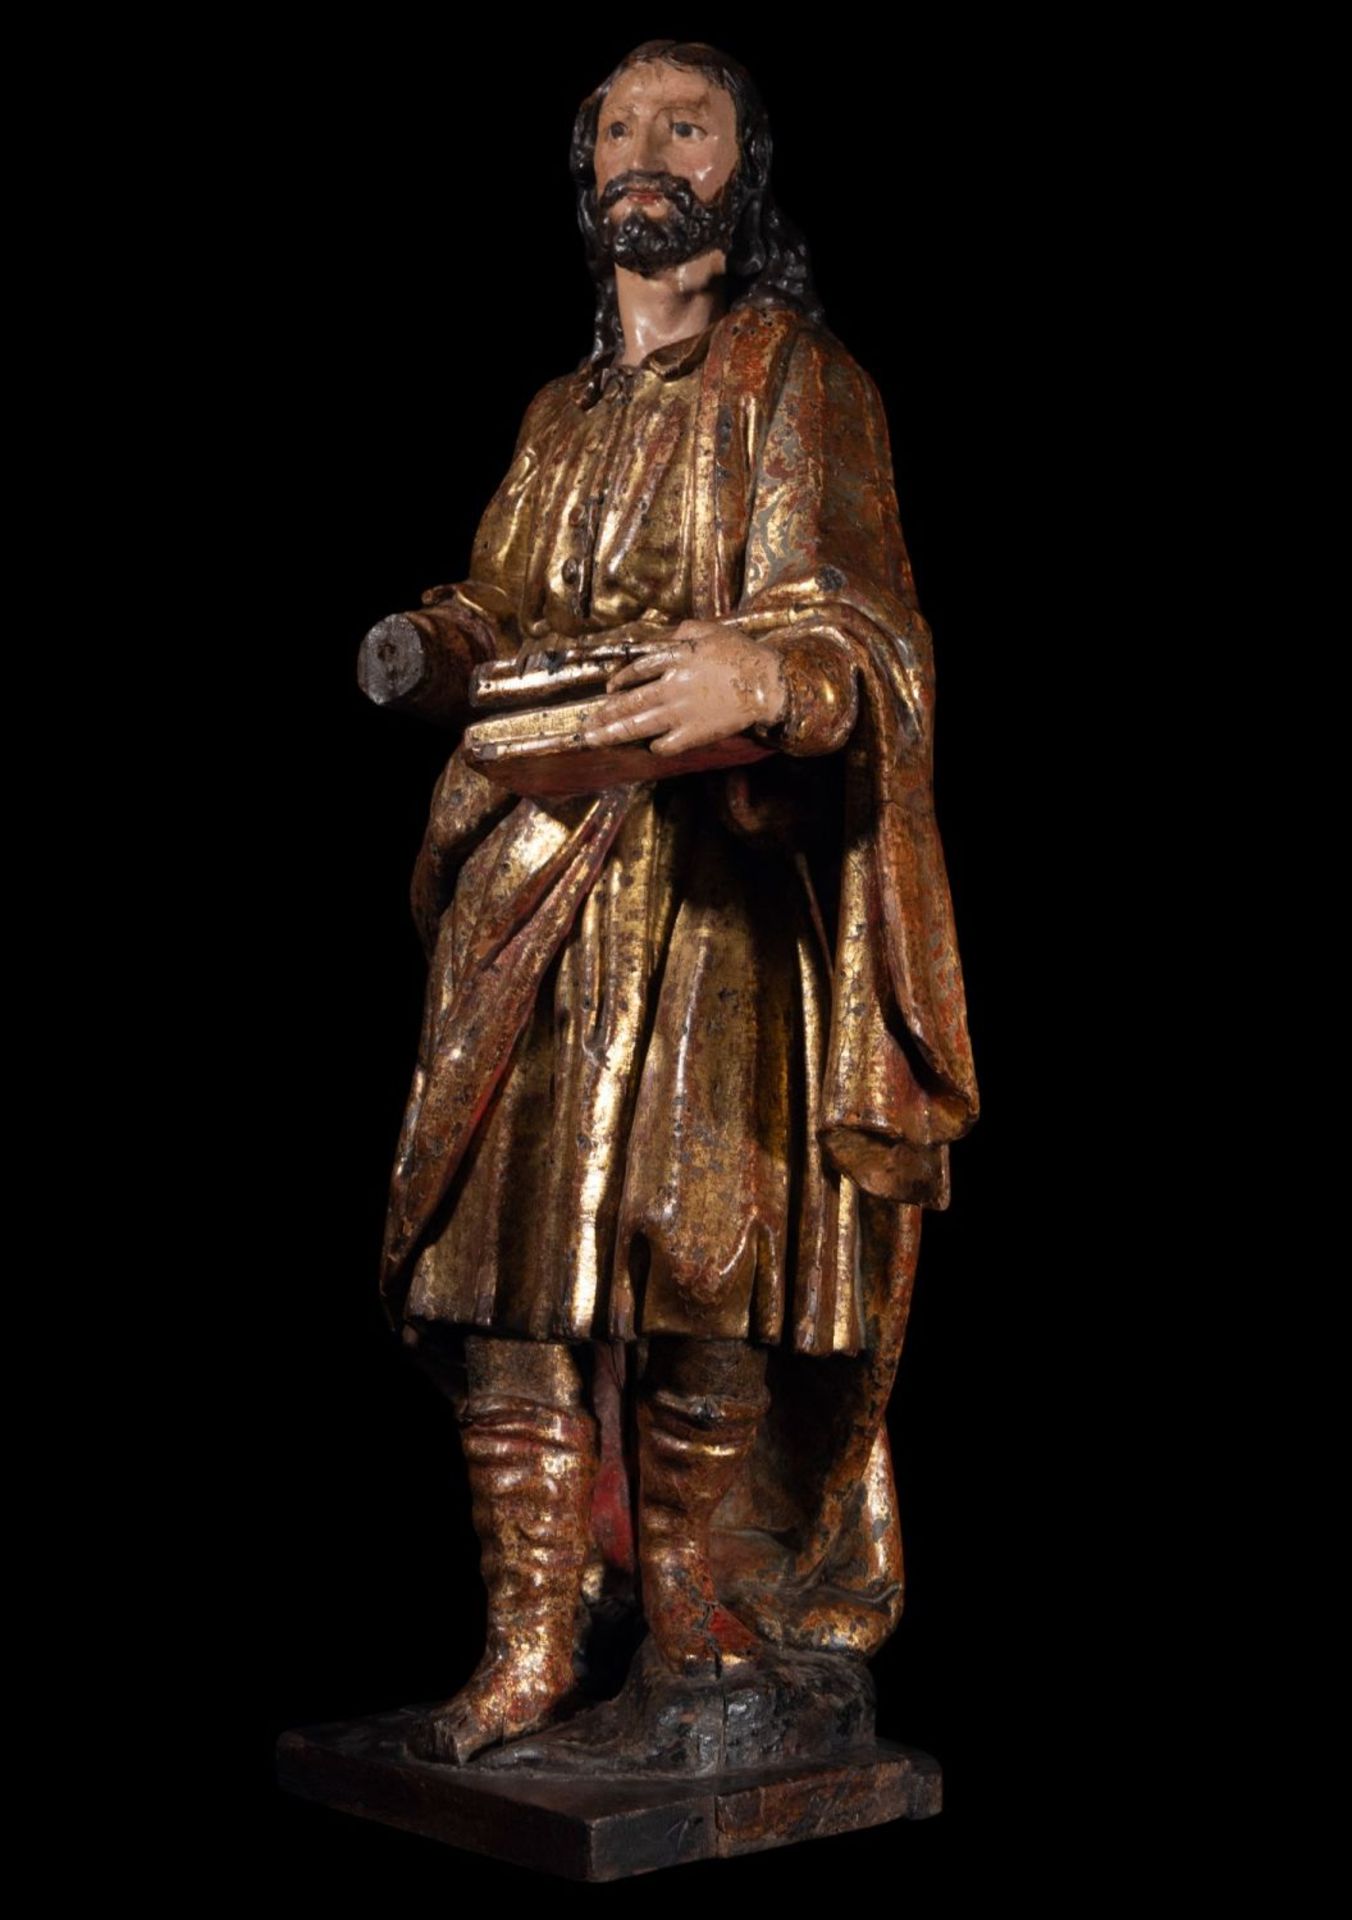 Large Romanist Sculpture of Saint John the Evangelist, Cologne, Southern Germany, 16th century - Image 2 of 4